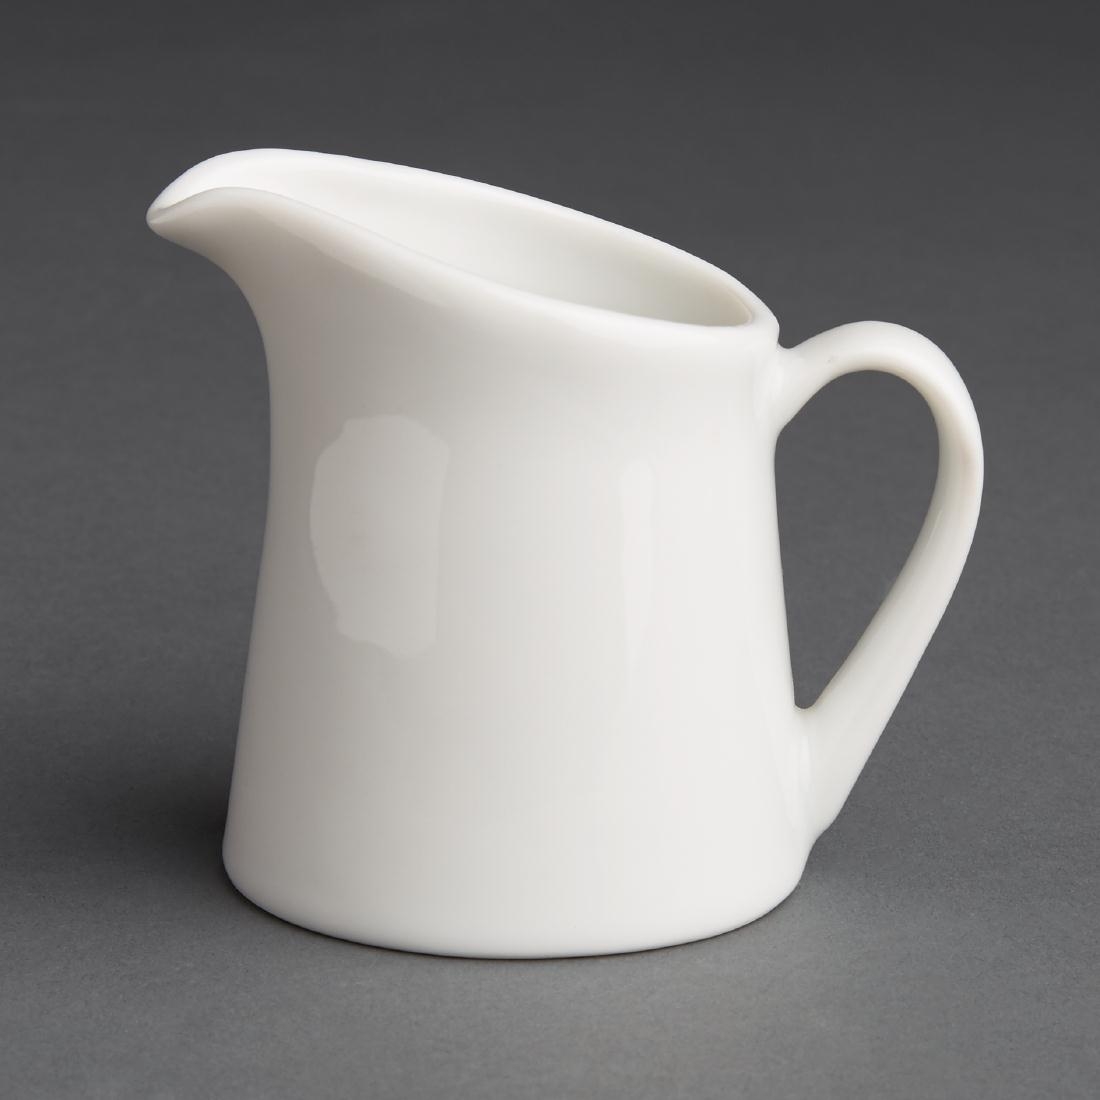 Olympia Cafe Milk Jug in Charcoal 70 ml 6 2.5 oz Pack Quantity 